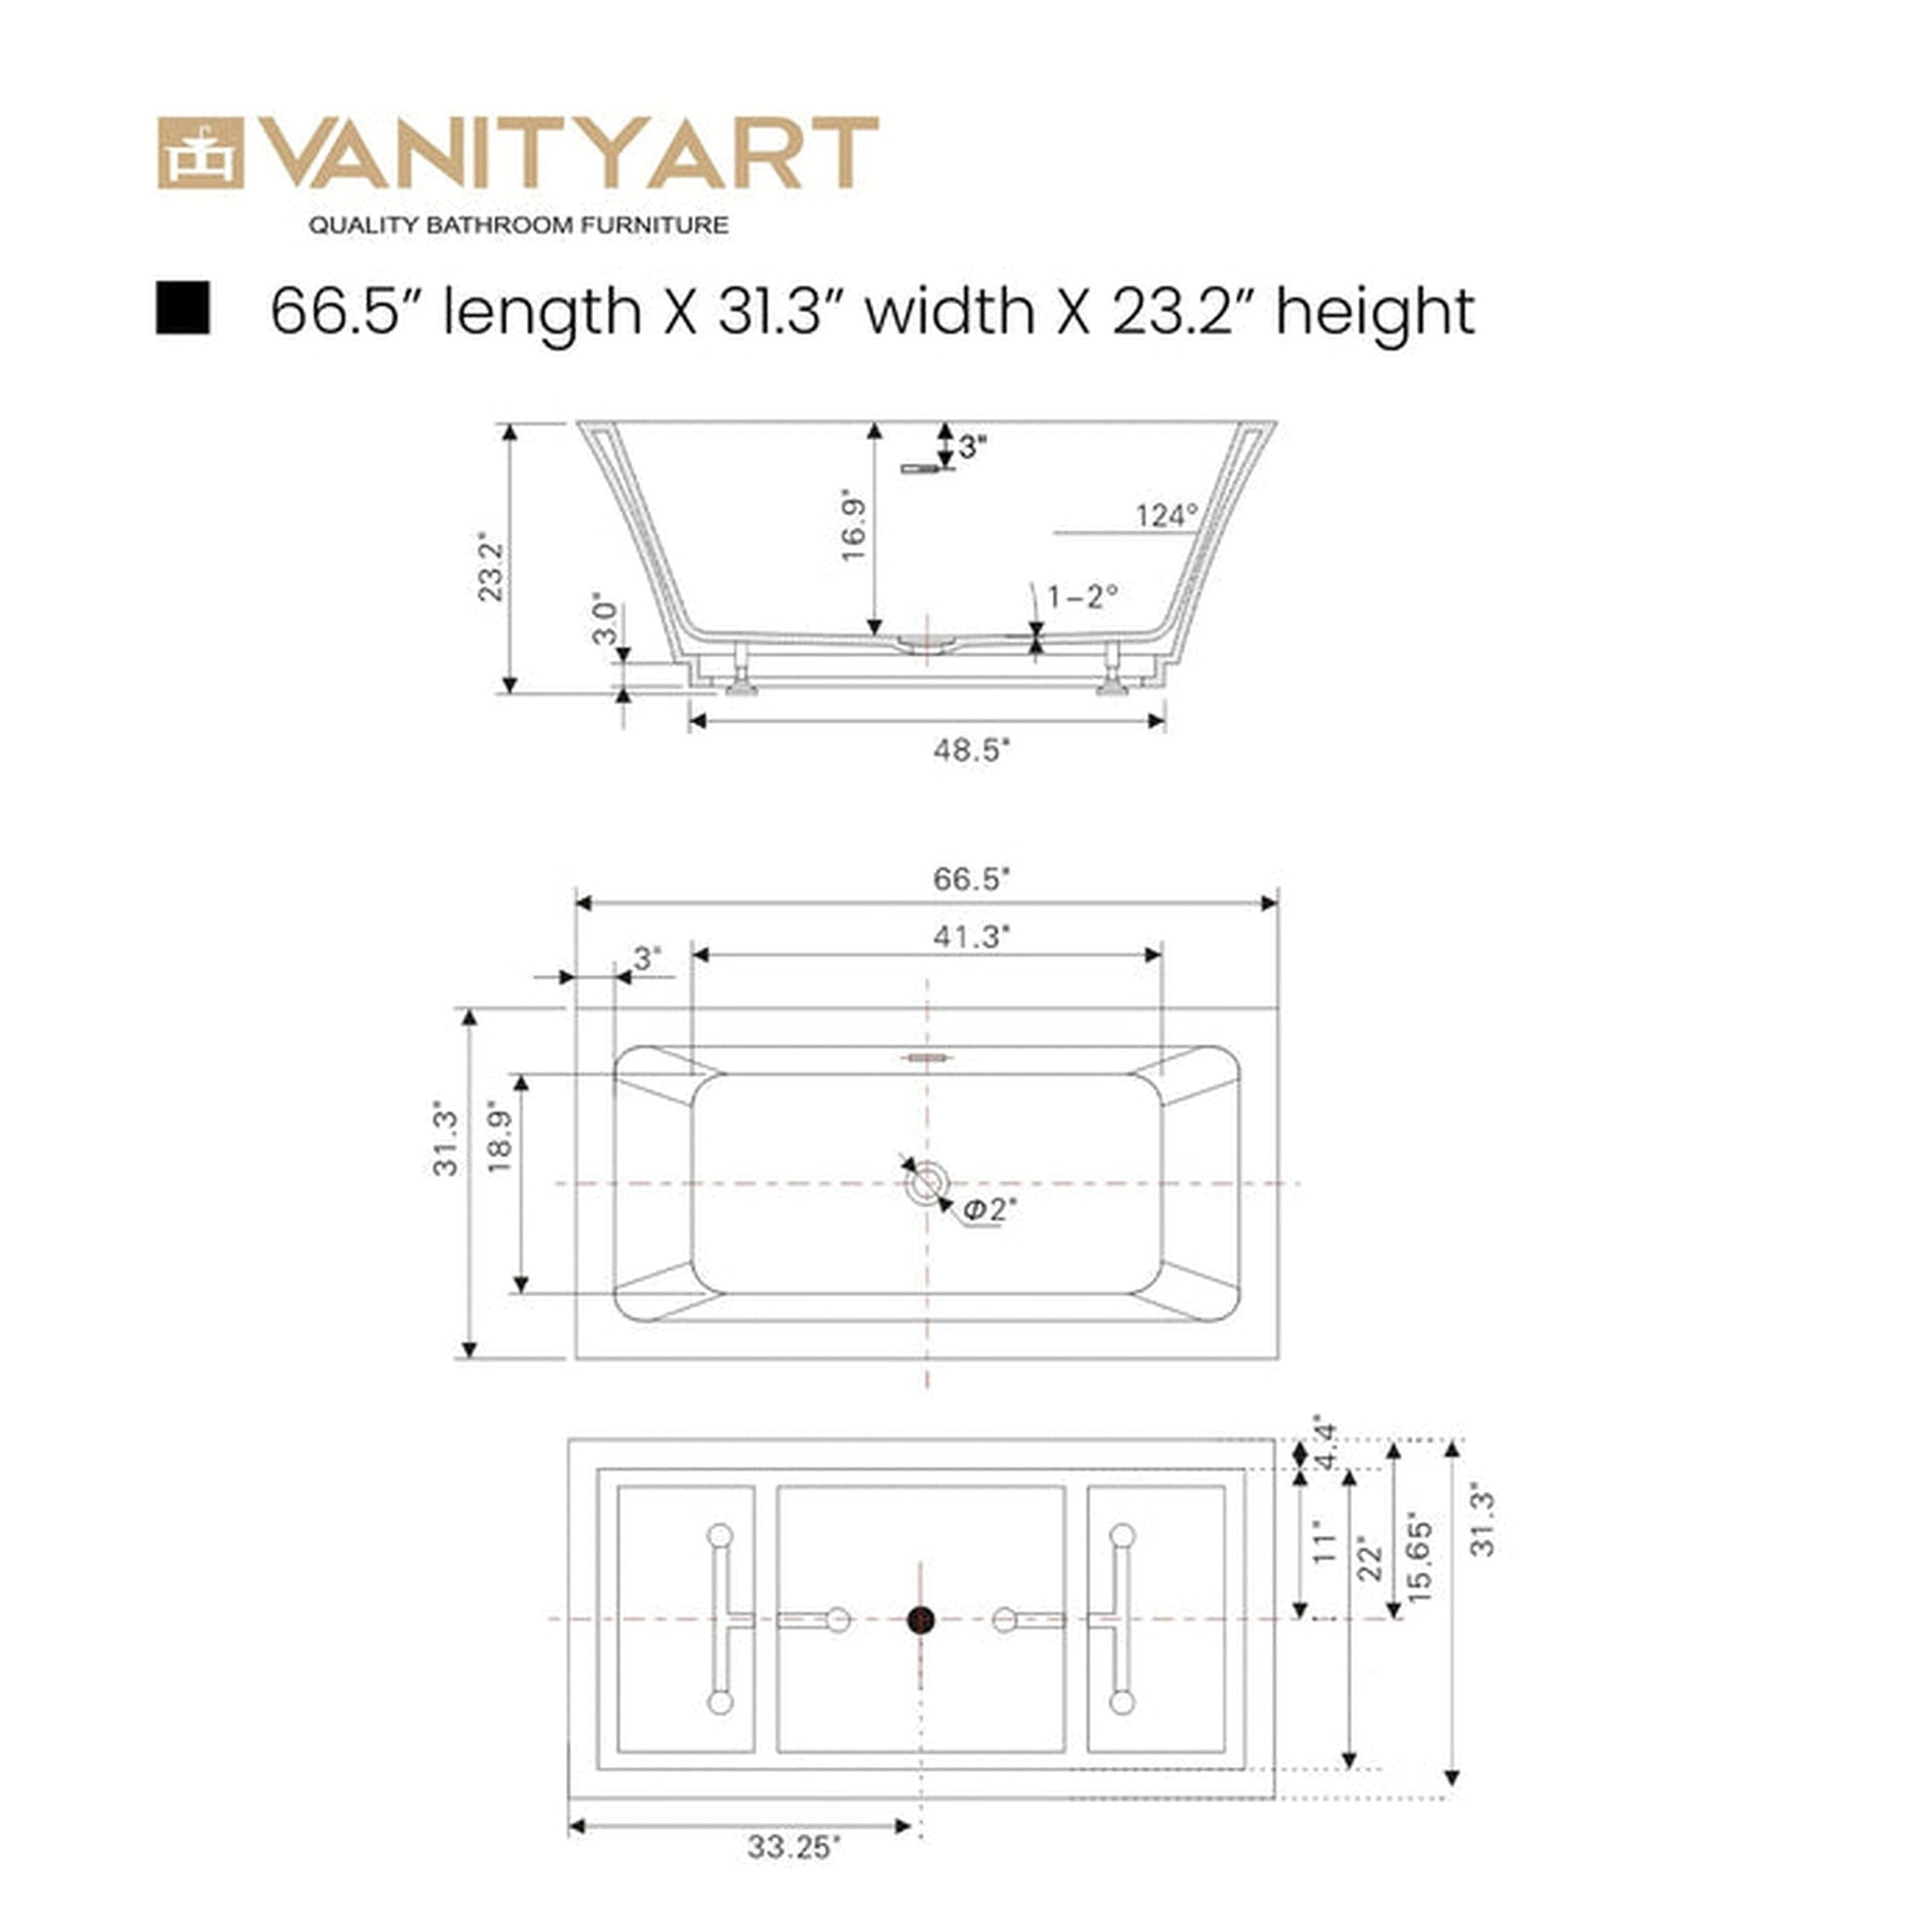 Vanity Art VA6817-L 67" Glossy White Acrylic Freestanding Rectangular Soaking Tub With Slotted Overflow and Pop-up Drain